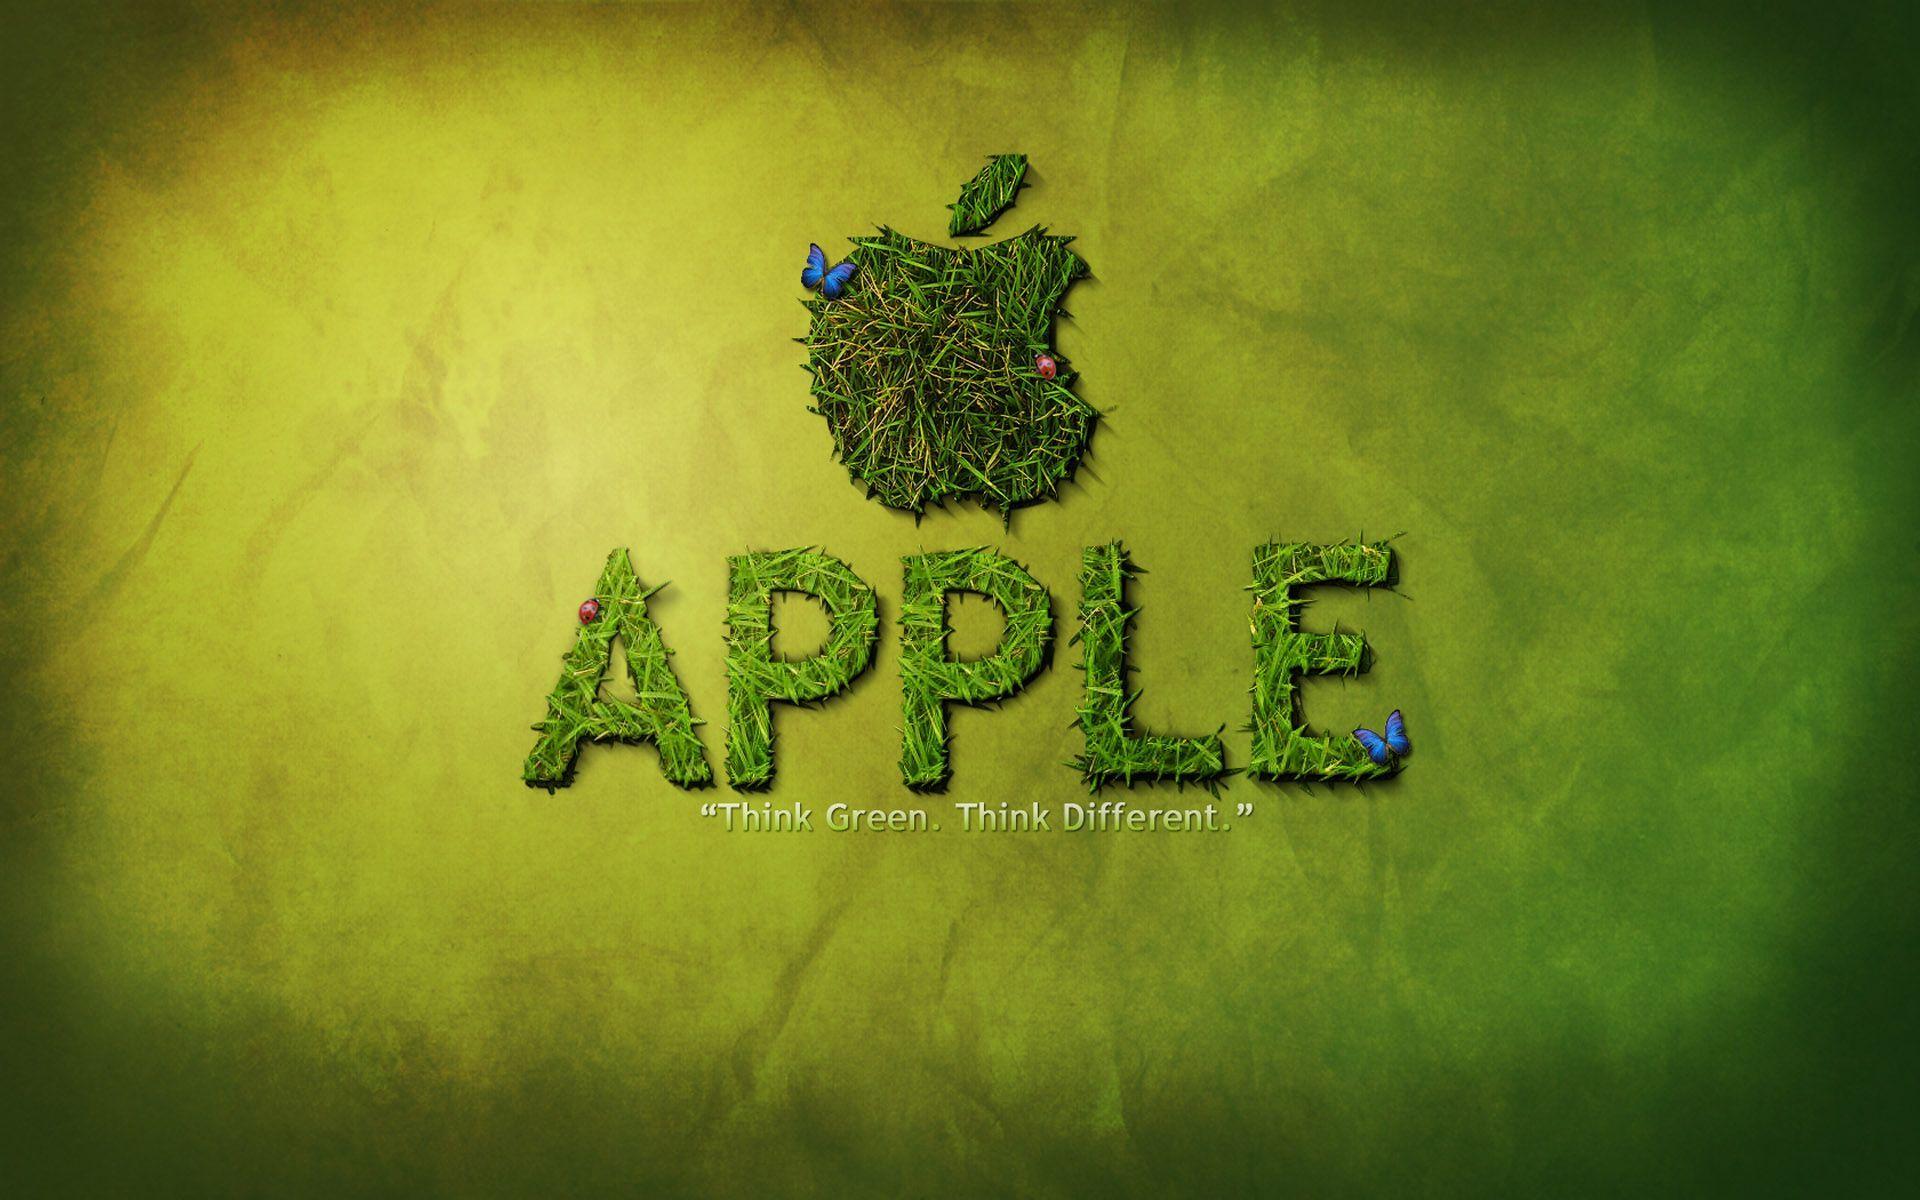 Apple mac Wallpaper and Background